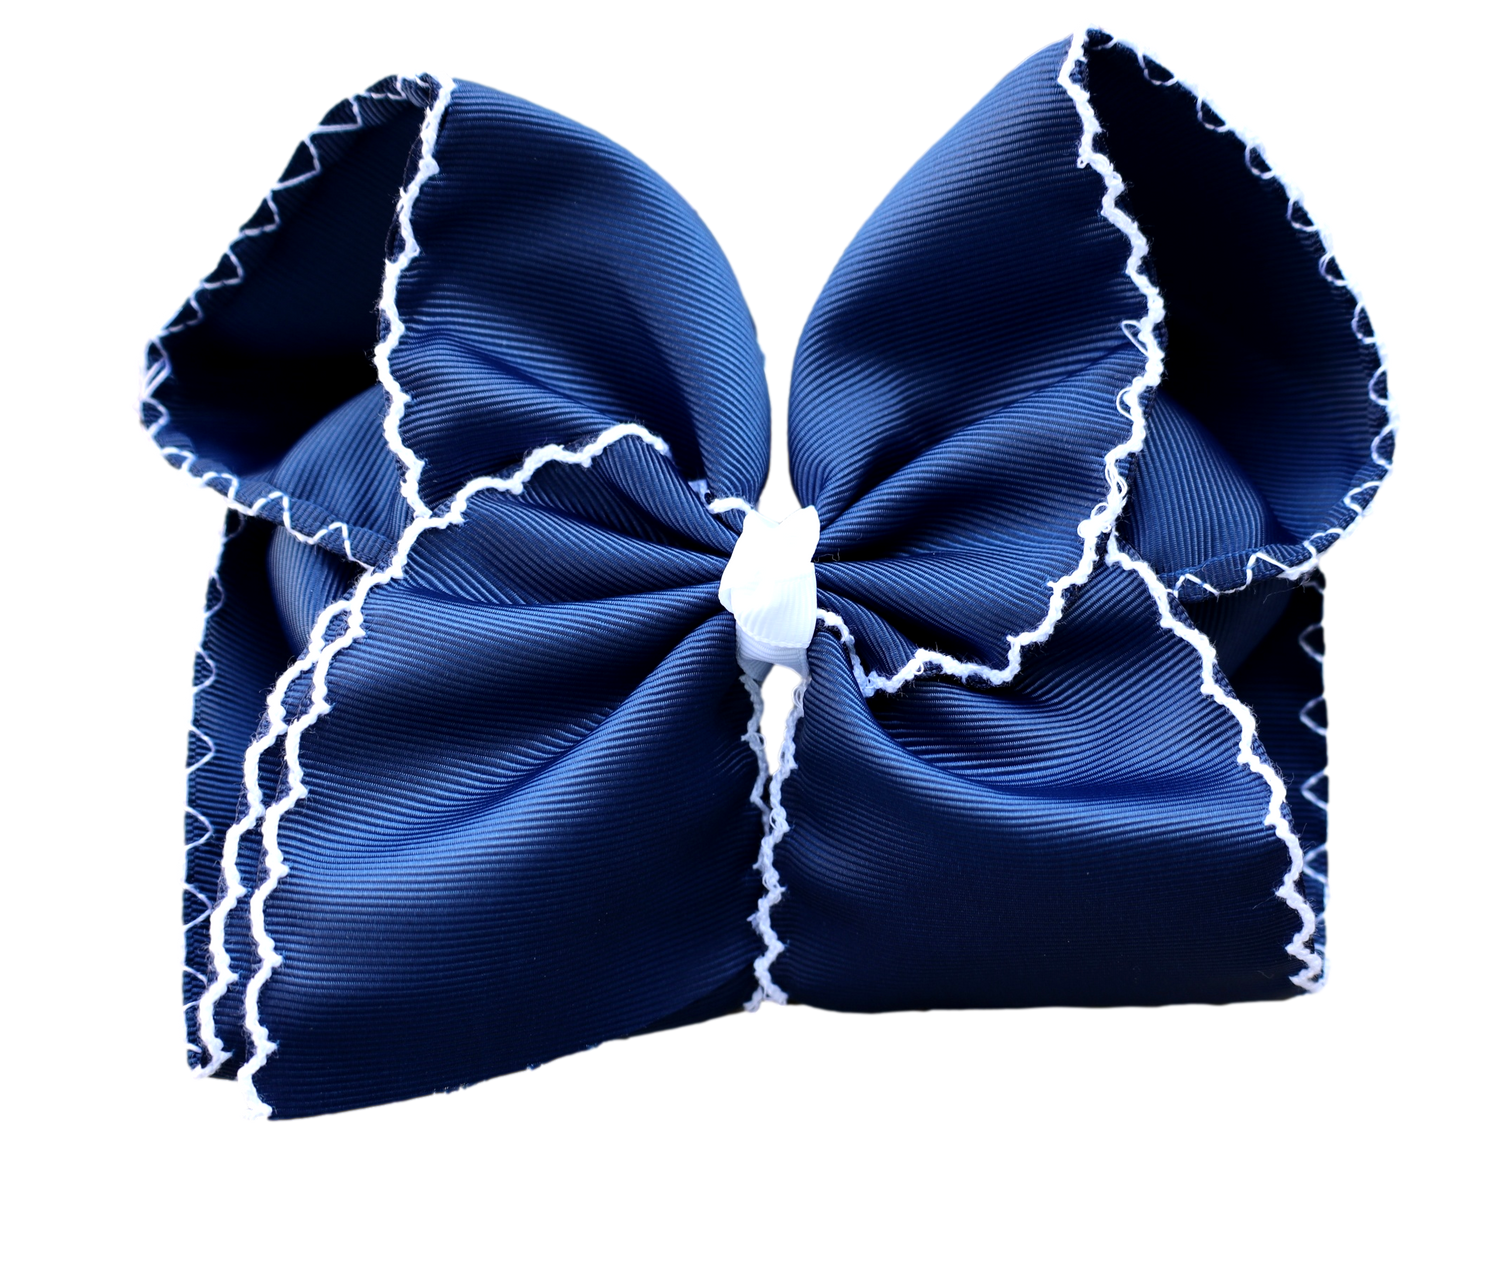 Pigtails and Fabric Bows